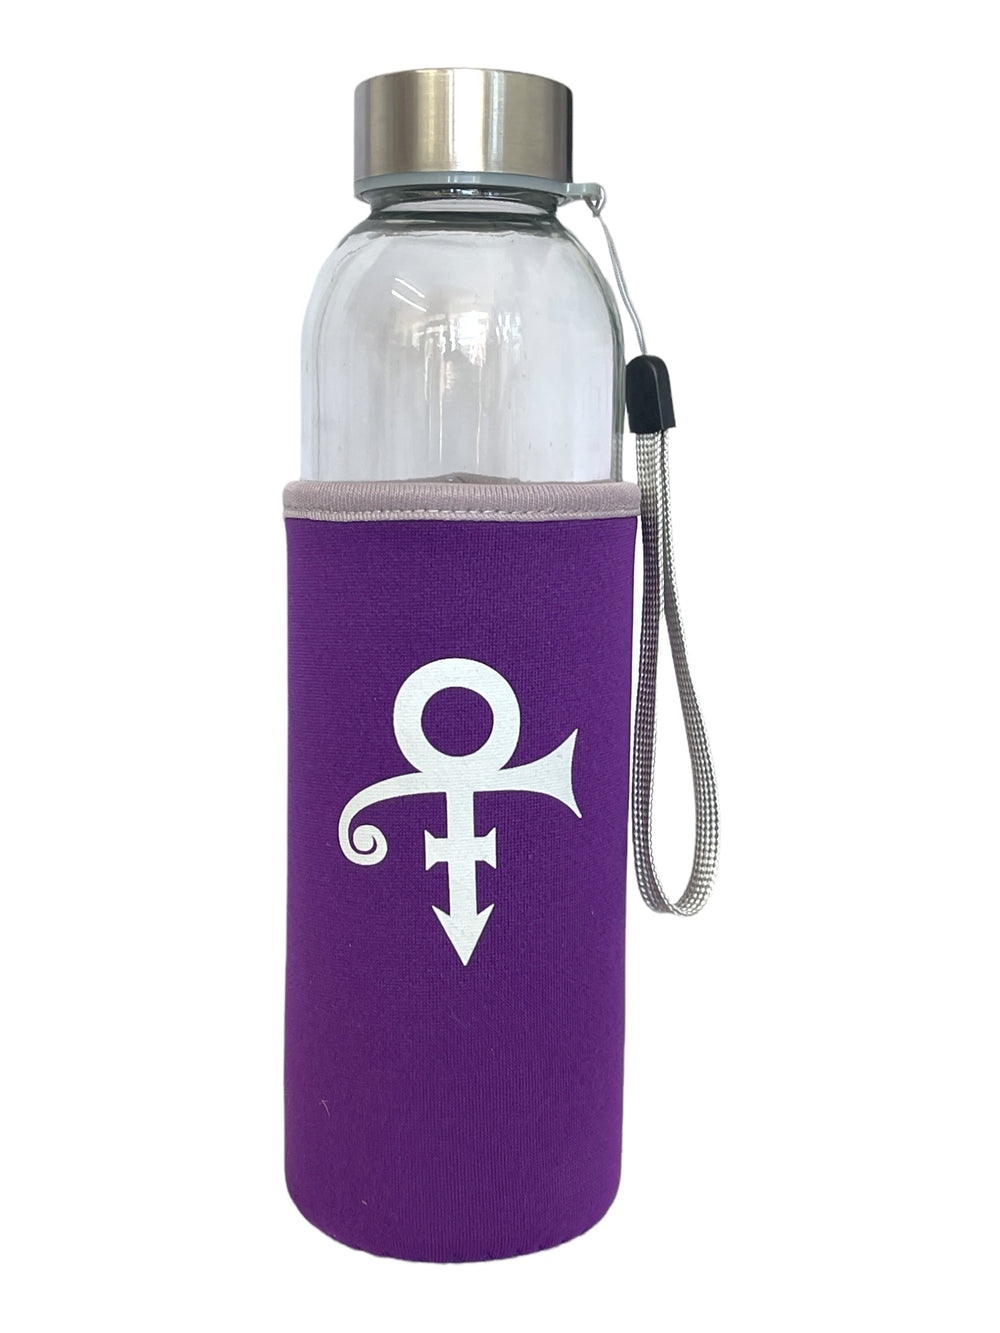 Prince – Love Symbol Official & Xclusive Glass Drinking Bottle Neoprene Pouch